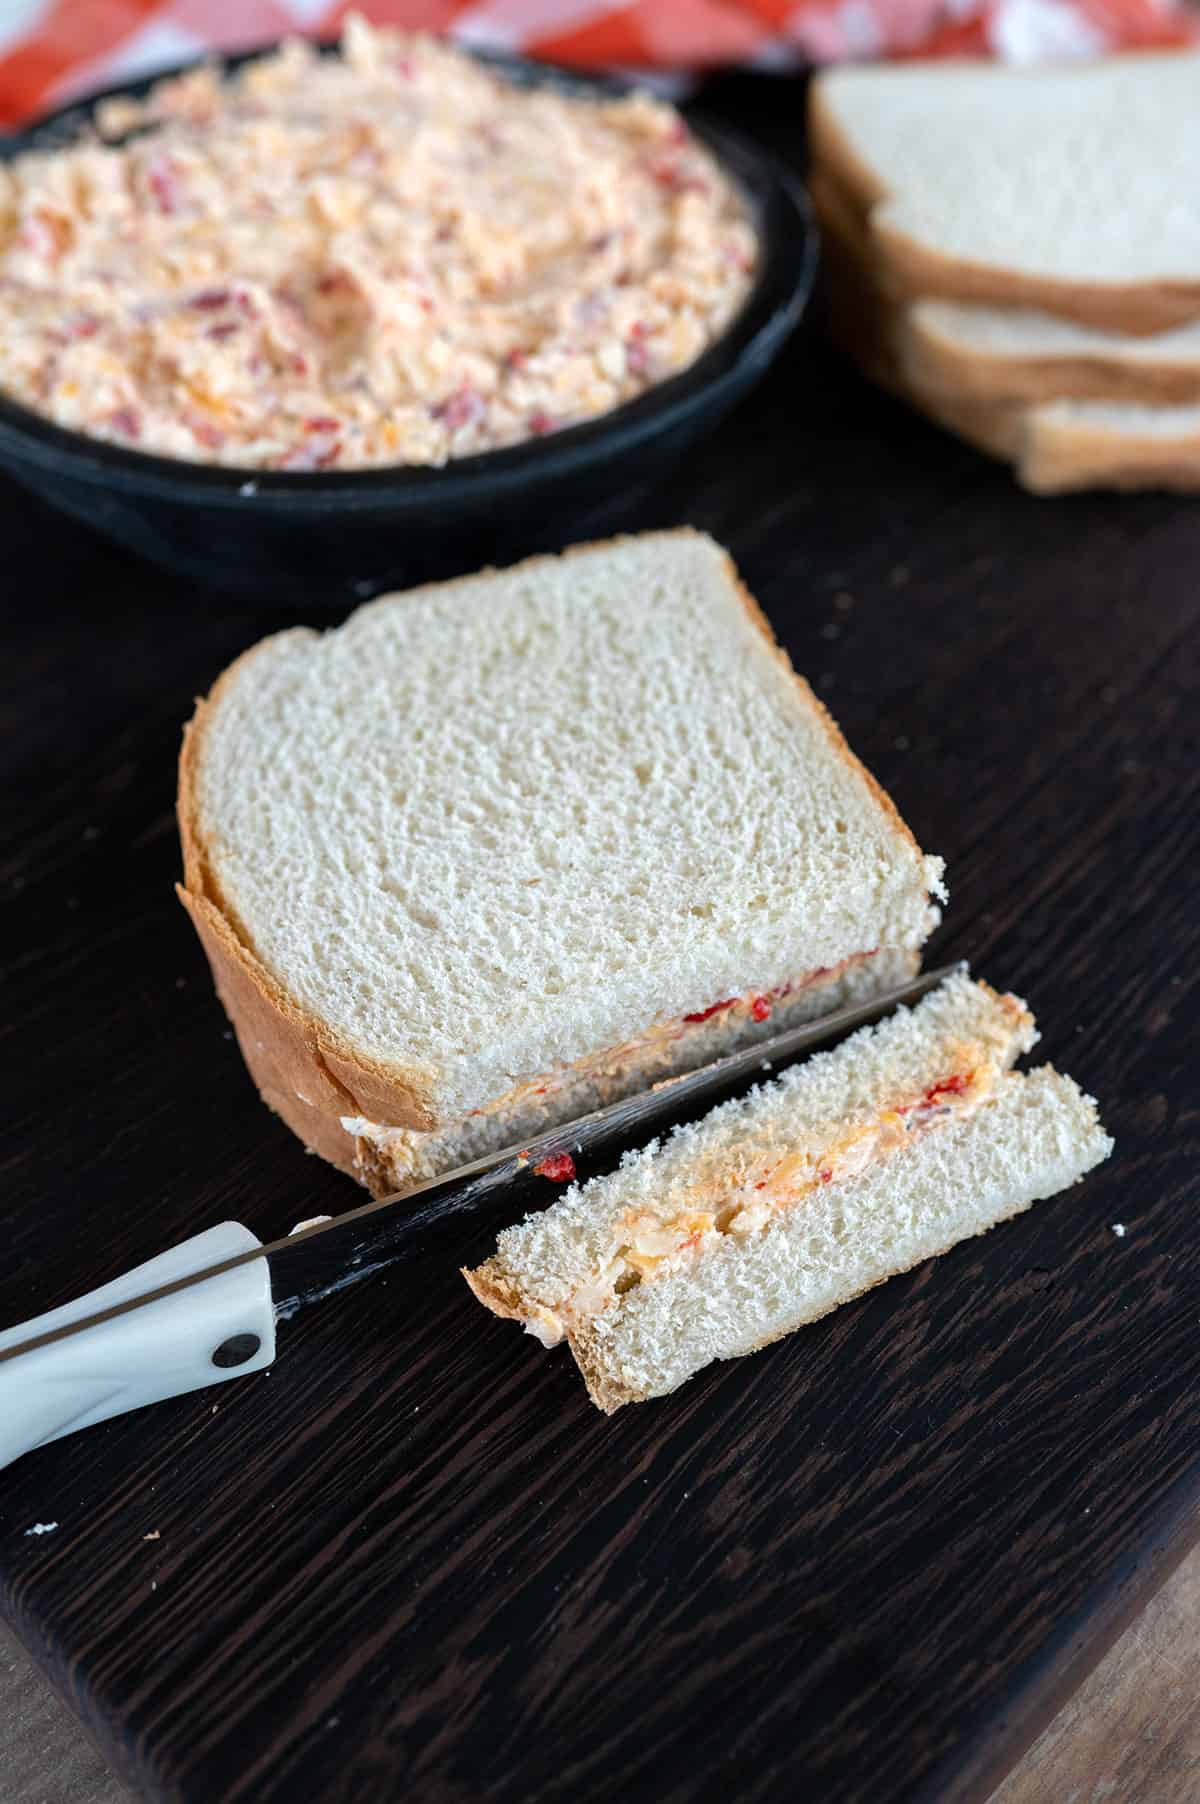 Cutting crust off of pimento cheese sandwich.